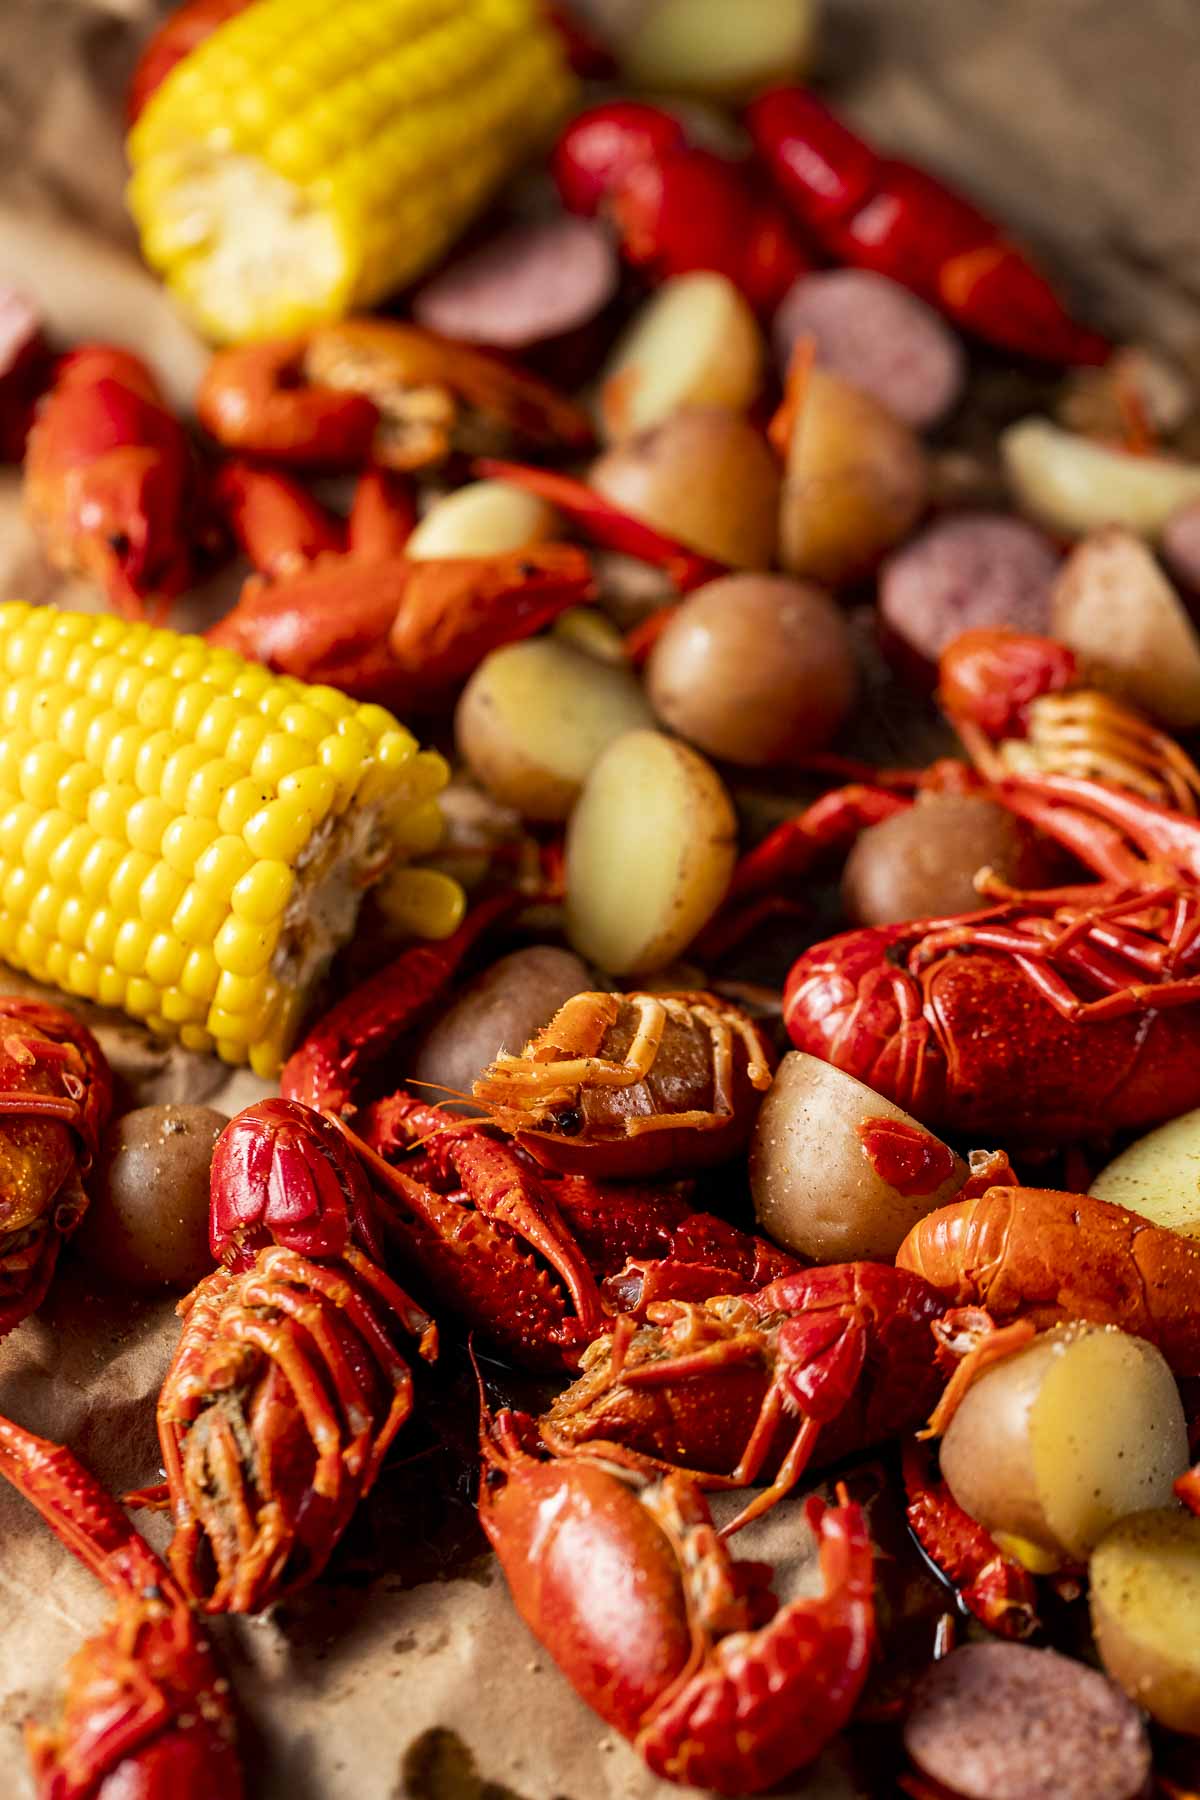 Close up view of cooked crawfish with corn and potatoes.